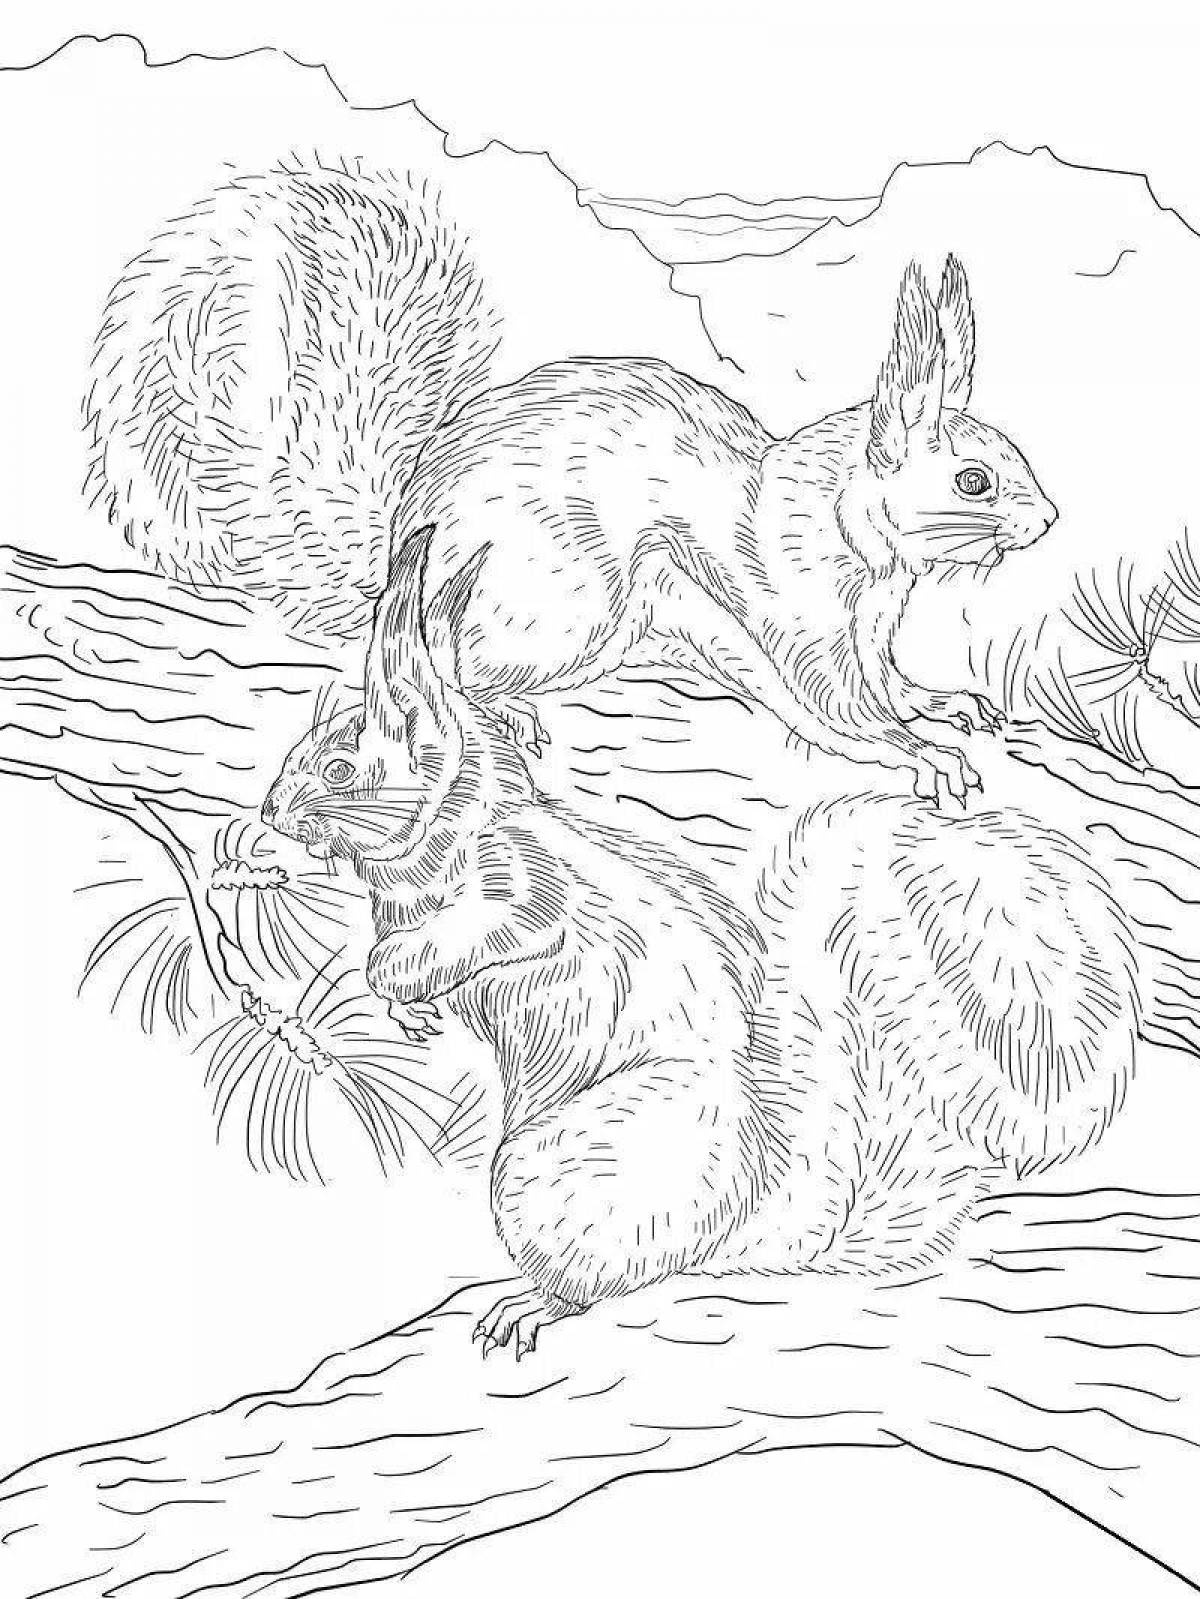 Coloring book playful winter squirrel